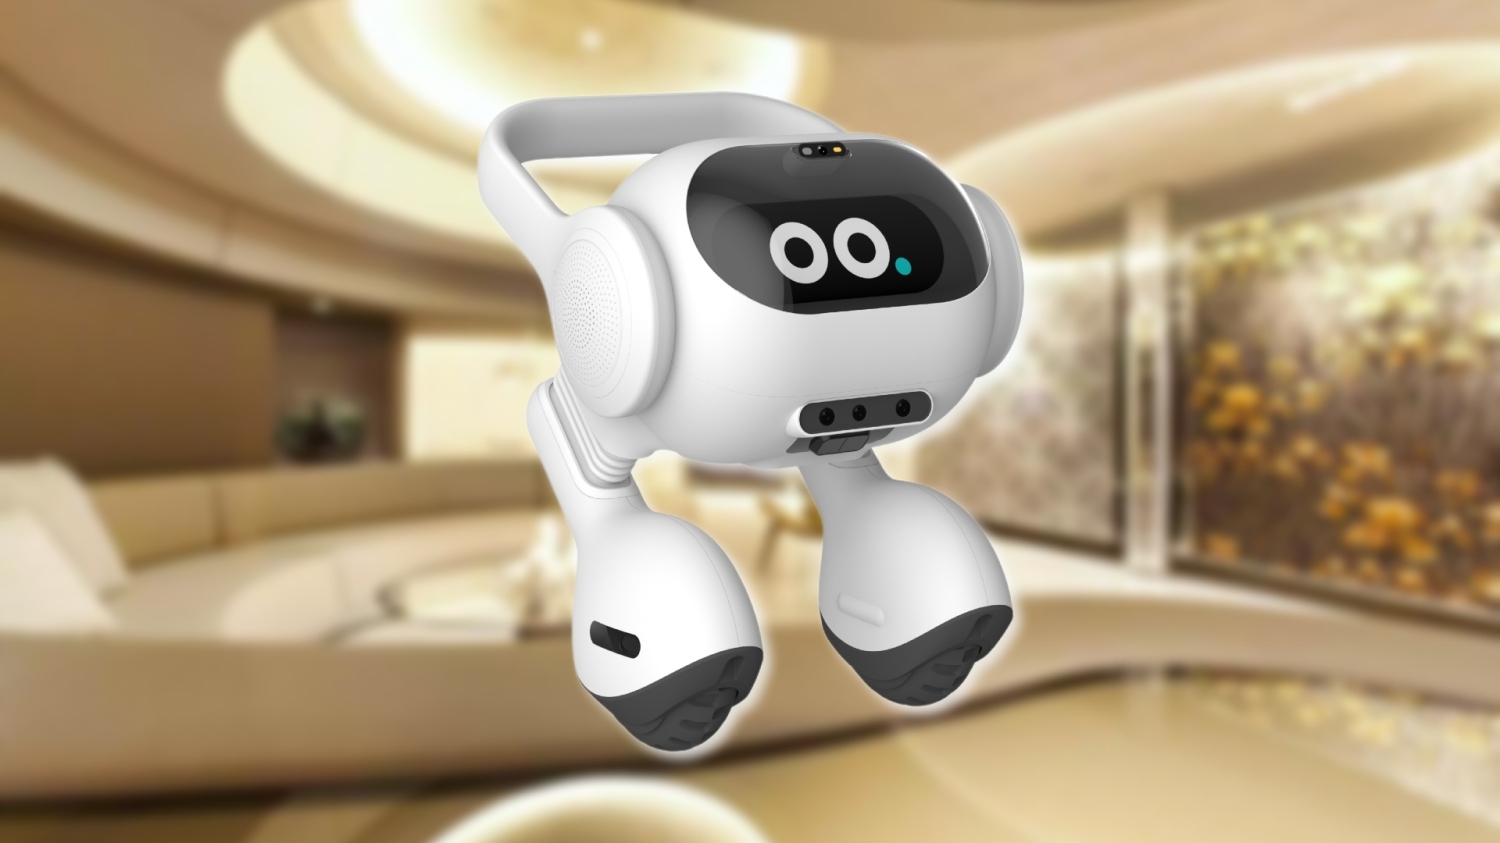 https://static.tweaktown.com/news/9/5/95186_01_lgs-smart-home-ai-agent-is-cutting-edge-robot-that-can-engage-in-complex-conversations_full.jpg